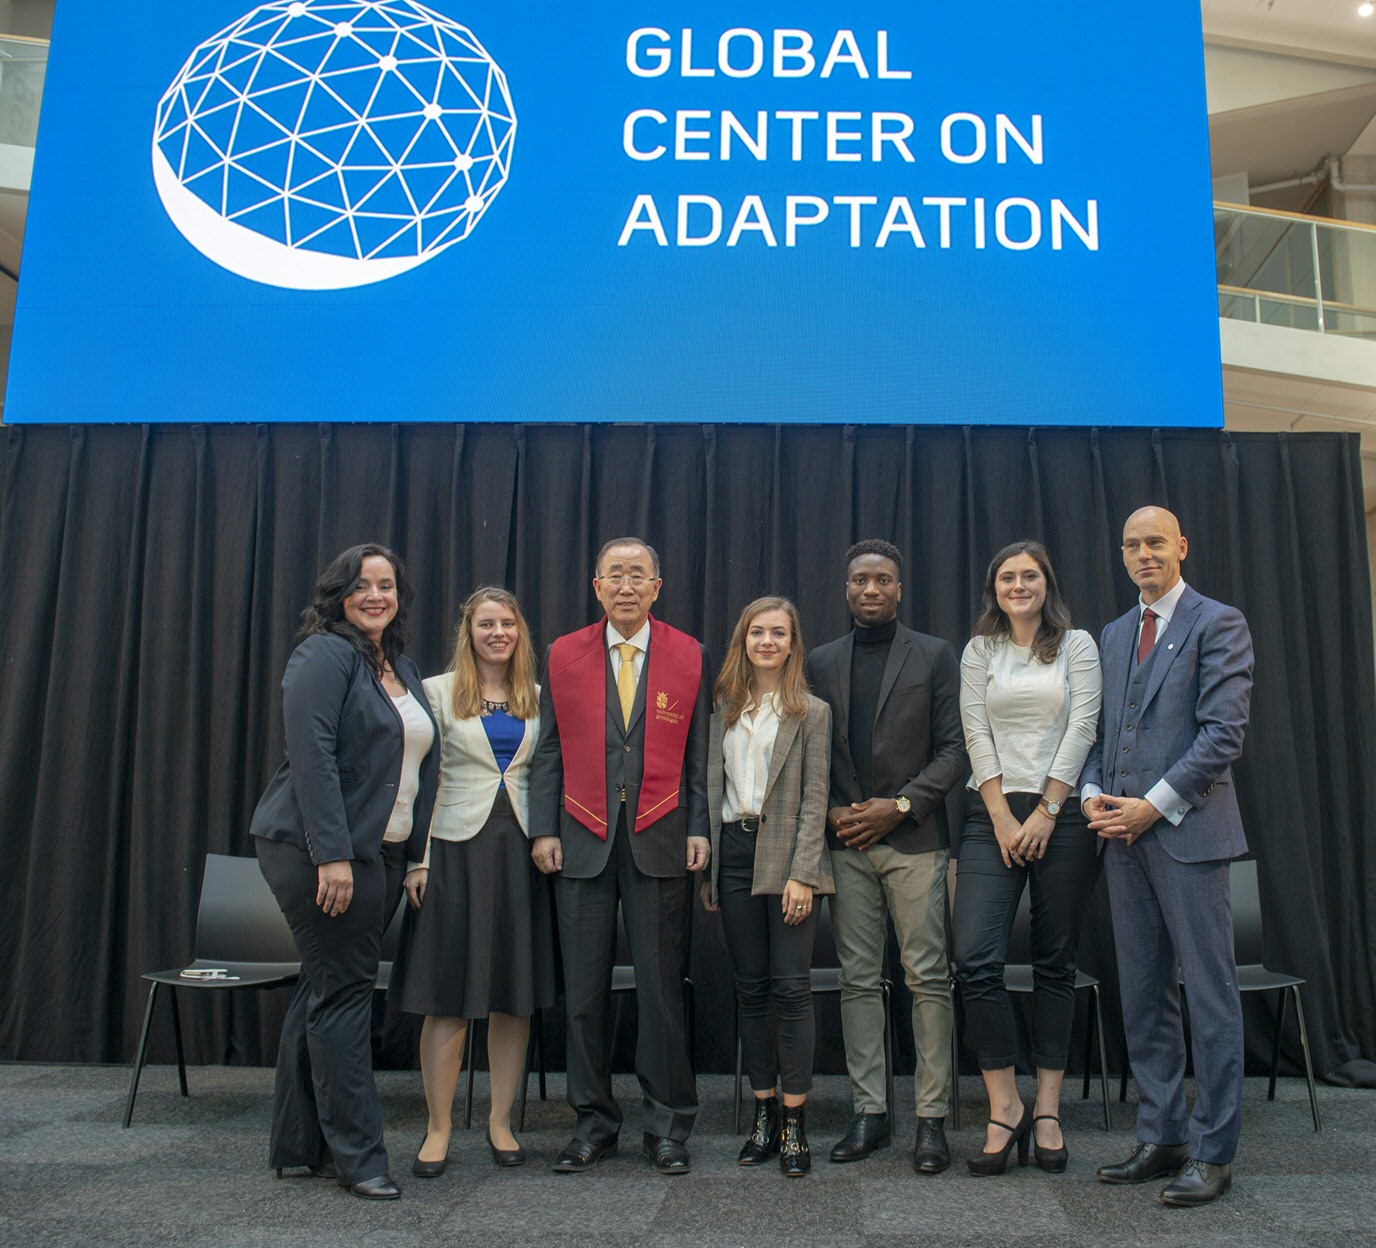 8th Secretary-General of the UN Ban Ki-moon opens Global Center on Adaptation Office in Groningen